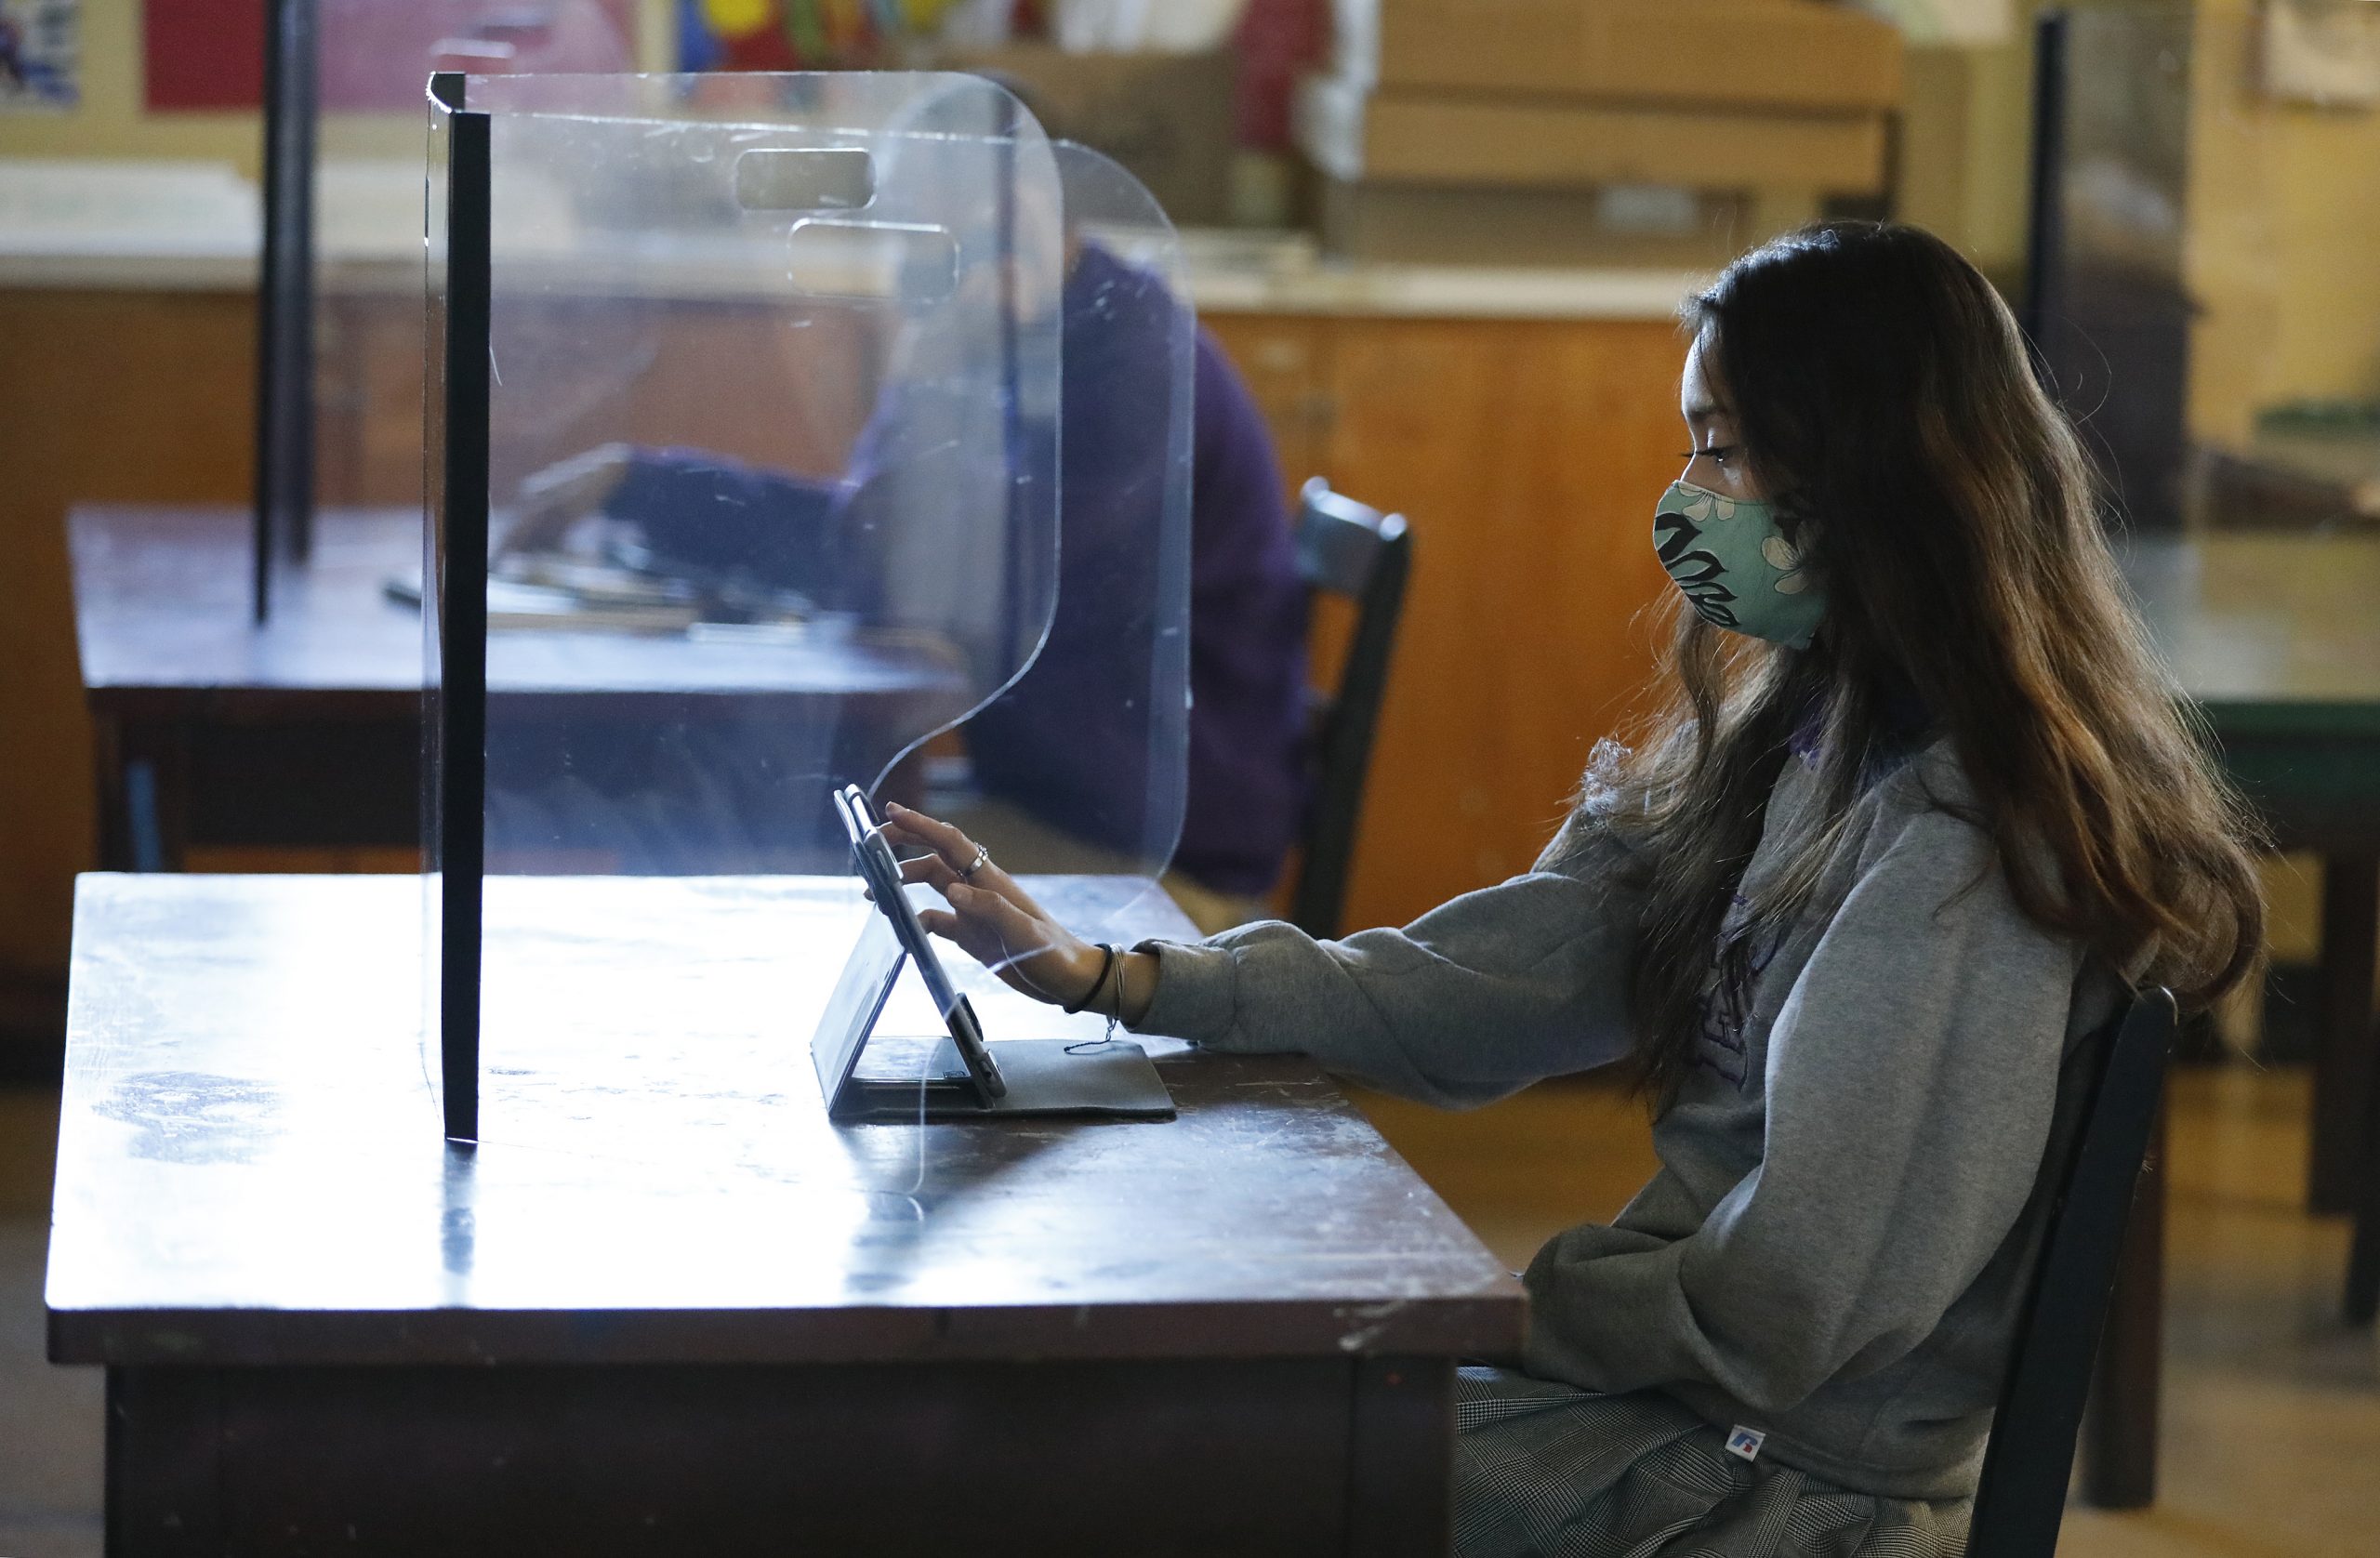 Side view of older teen girl with long brown hair, wearing mask sits at desk with a plexiglass barrier in classroom. She is using a tablet.